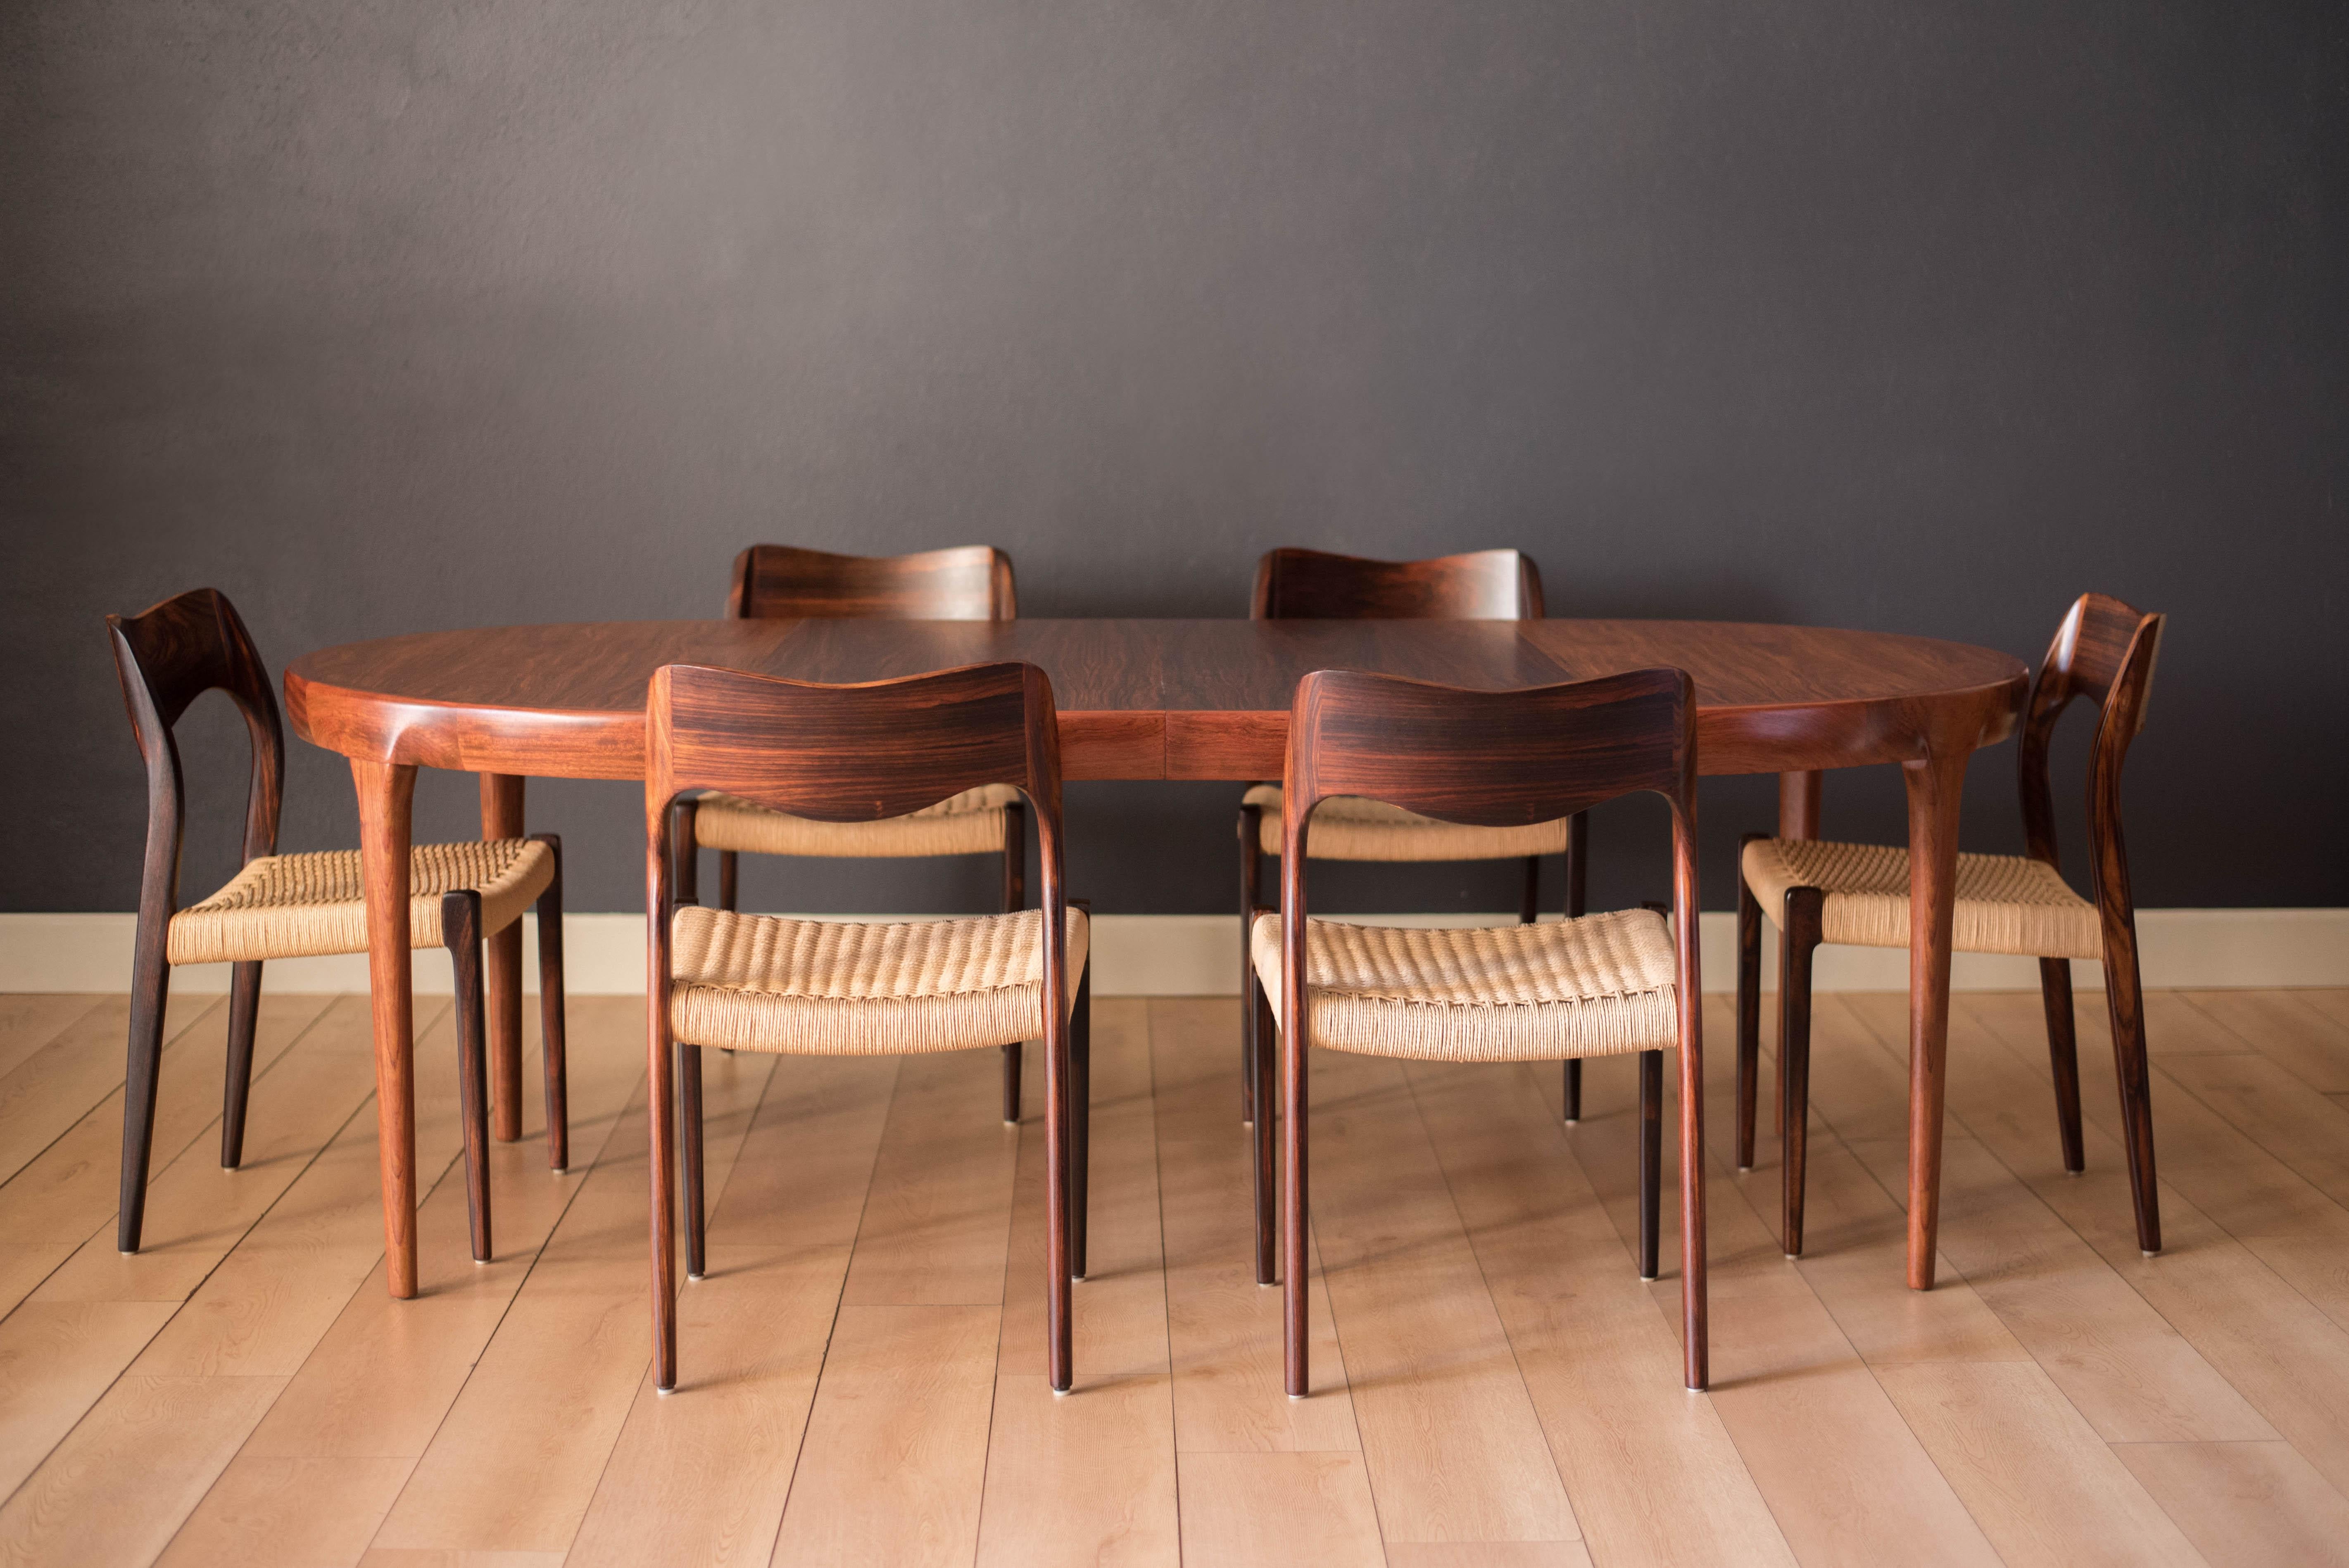 Mid-Century Modern dining chairs by Niels O. Møller for J.L. Møller Møbelfabrik in Brazilian rosewood model no. 71, Denmark. This set retains the original paper cord seats all intact. Price is for the set of six.